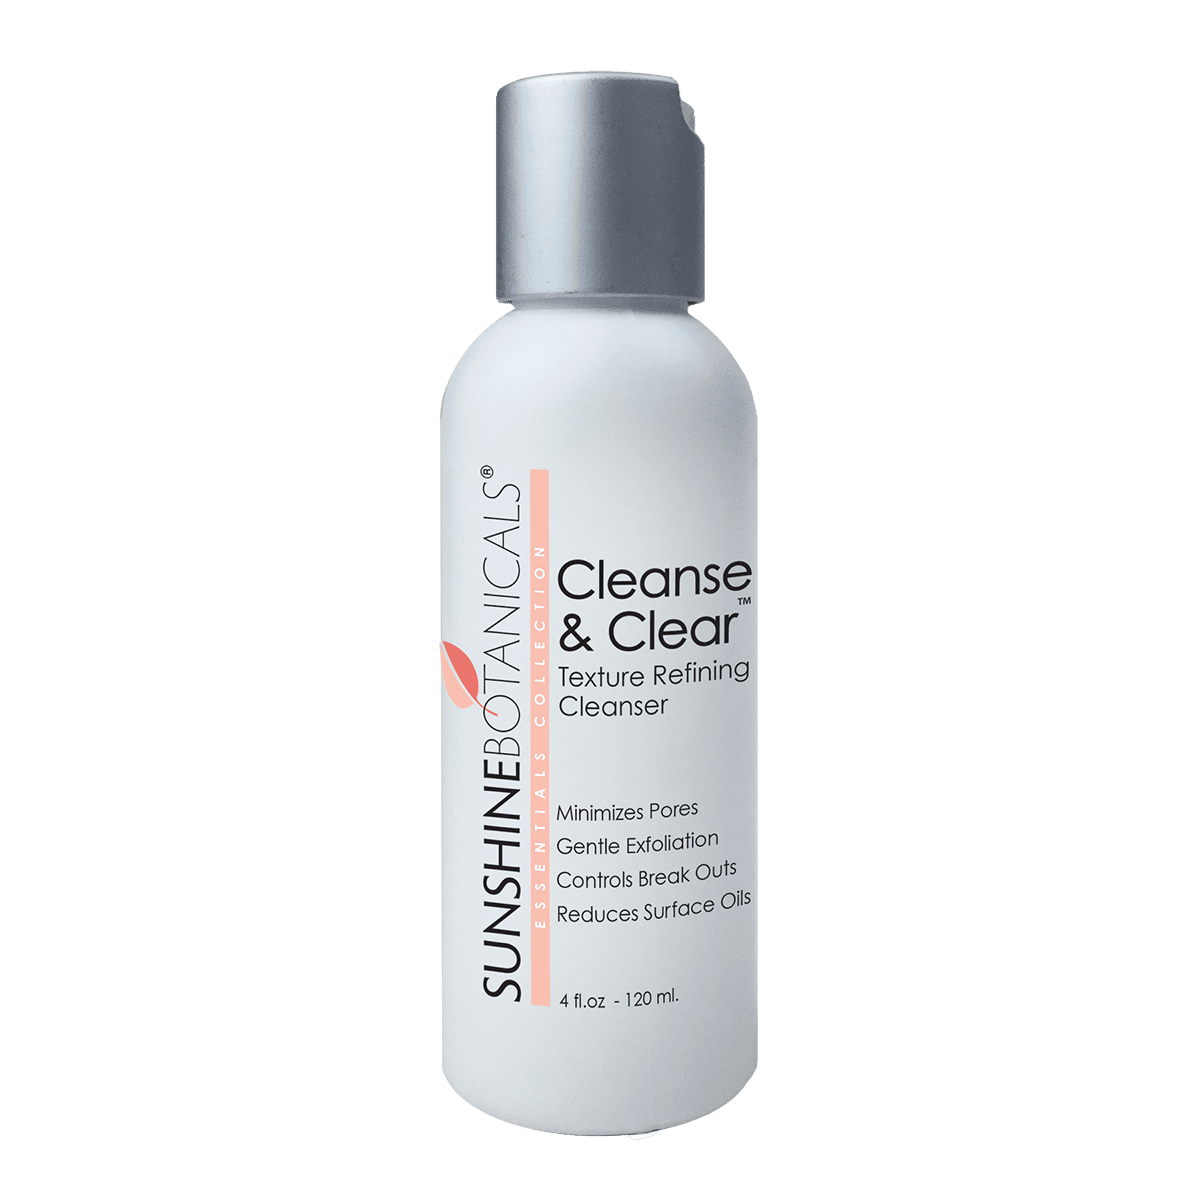 Sunshine Botanicals Cleanse and Clear